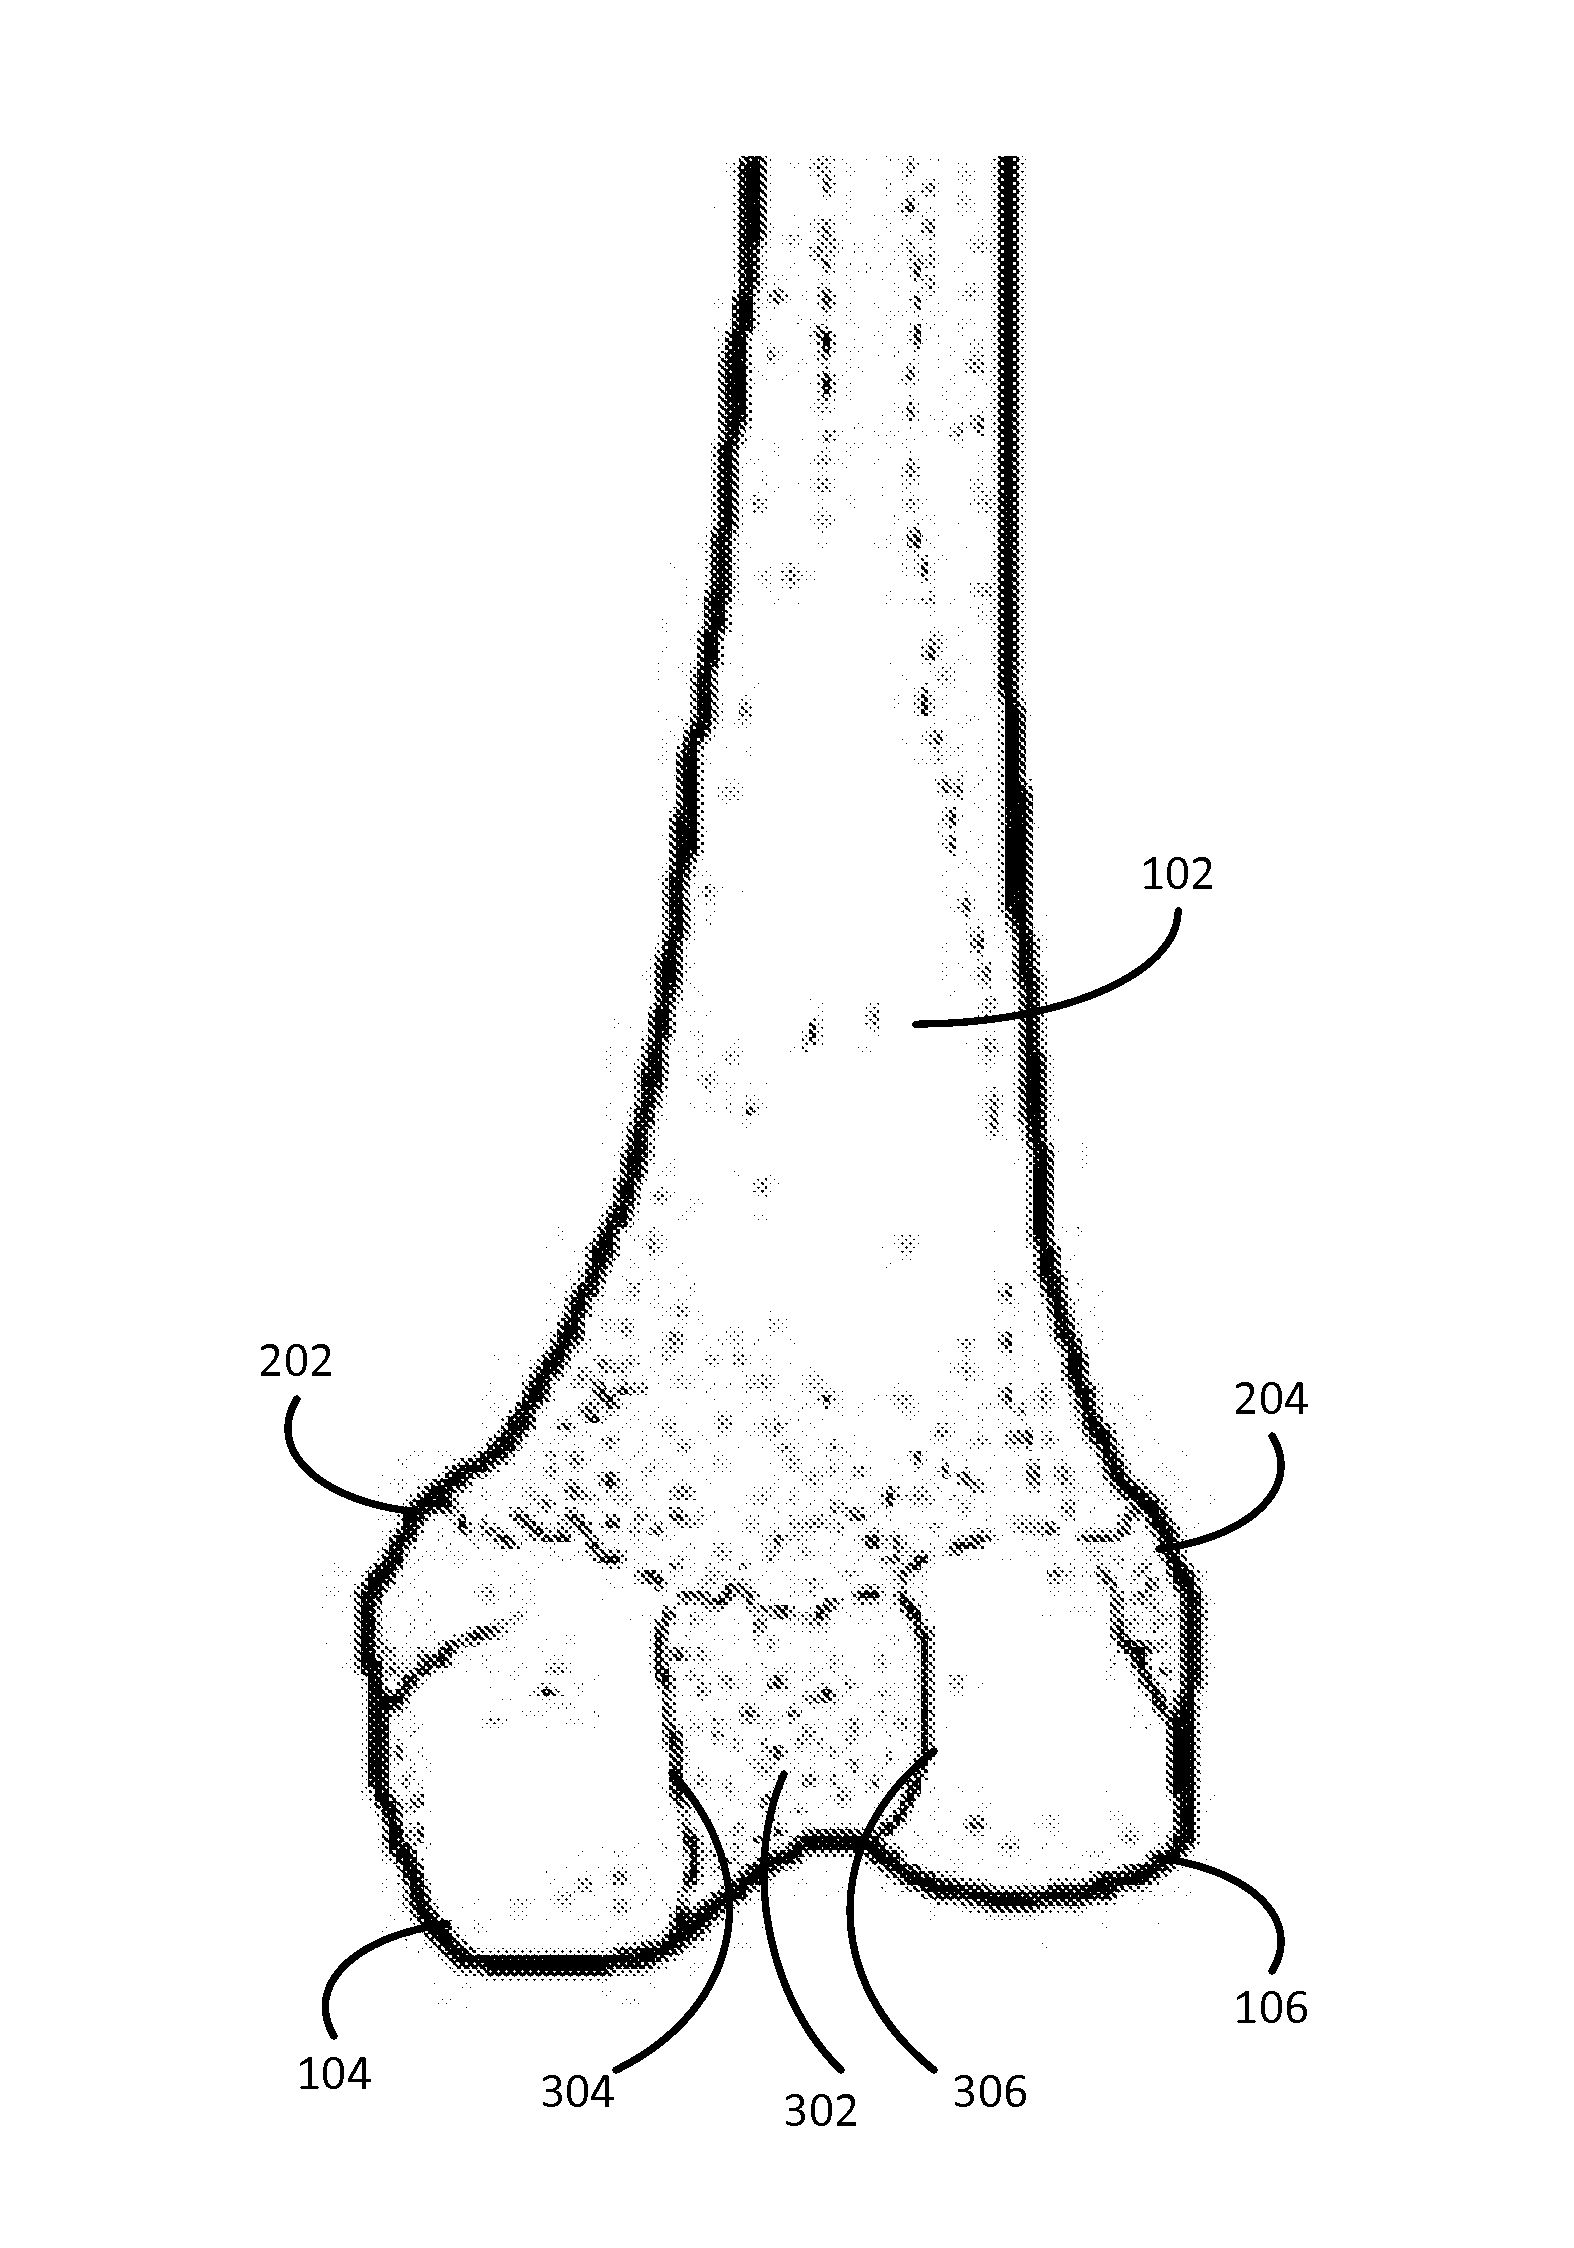 Method for knee resection alignment approximation in knee replacement procedures